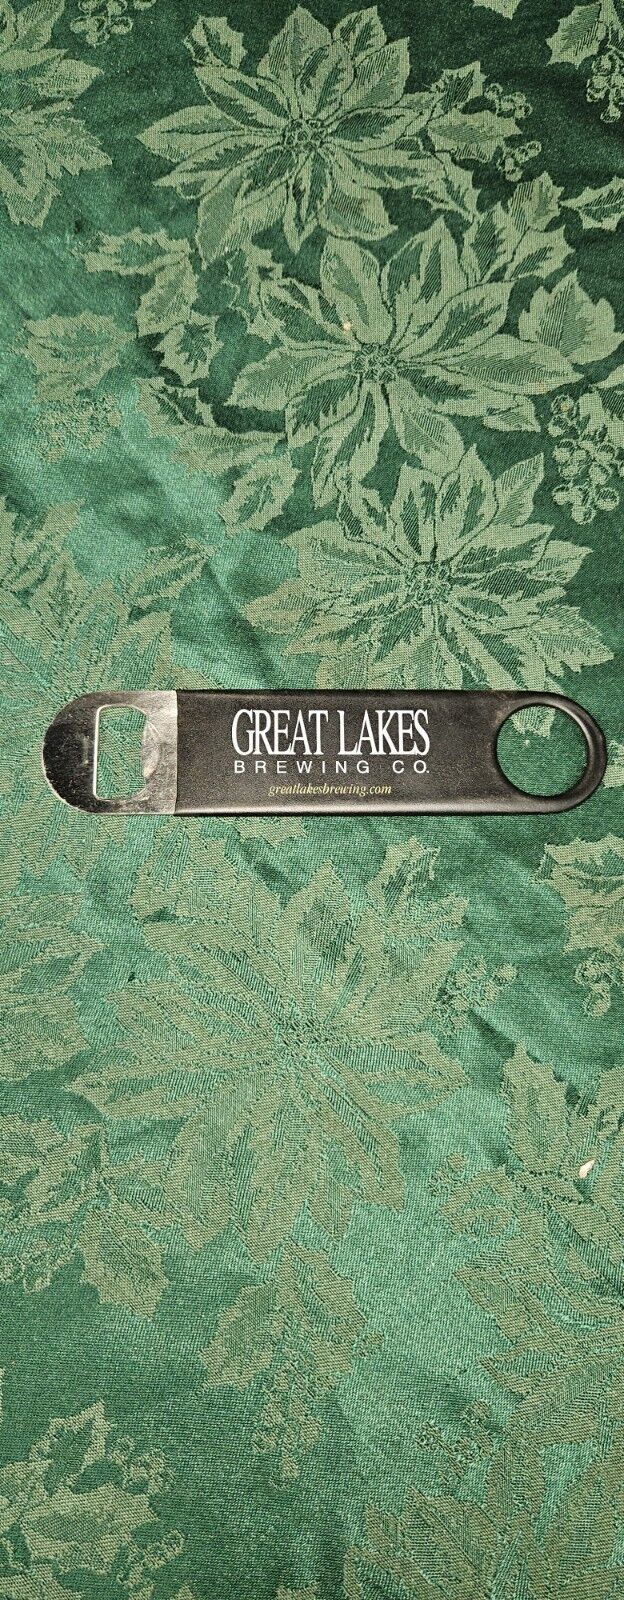 Great Lakes Brewing Co Advertising Bottle Opener